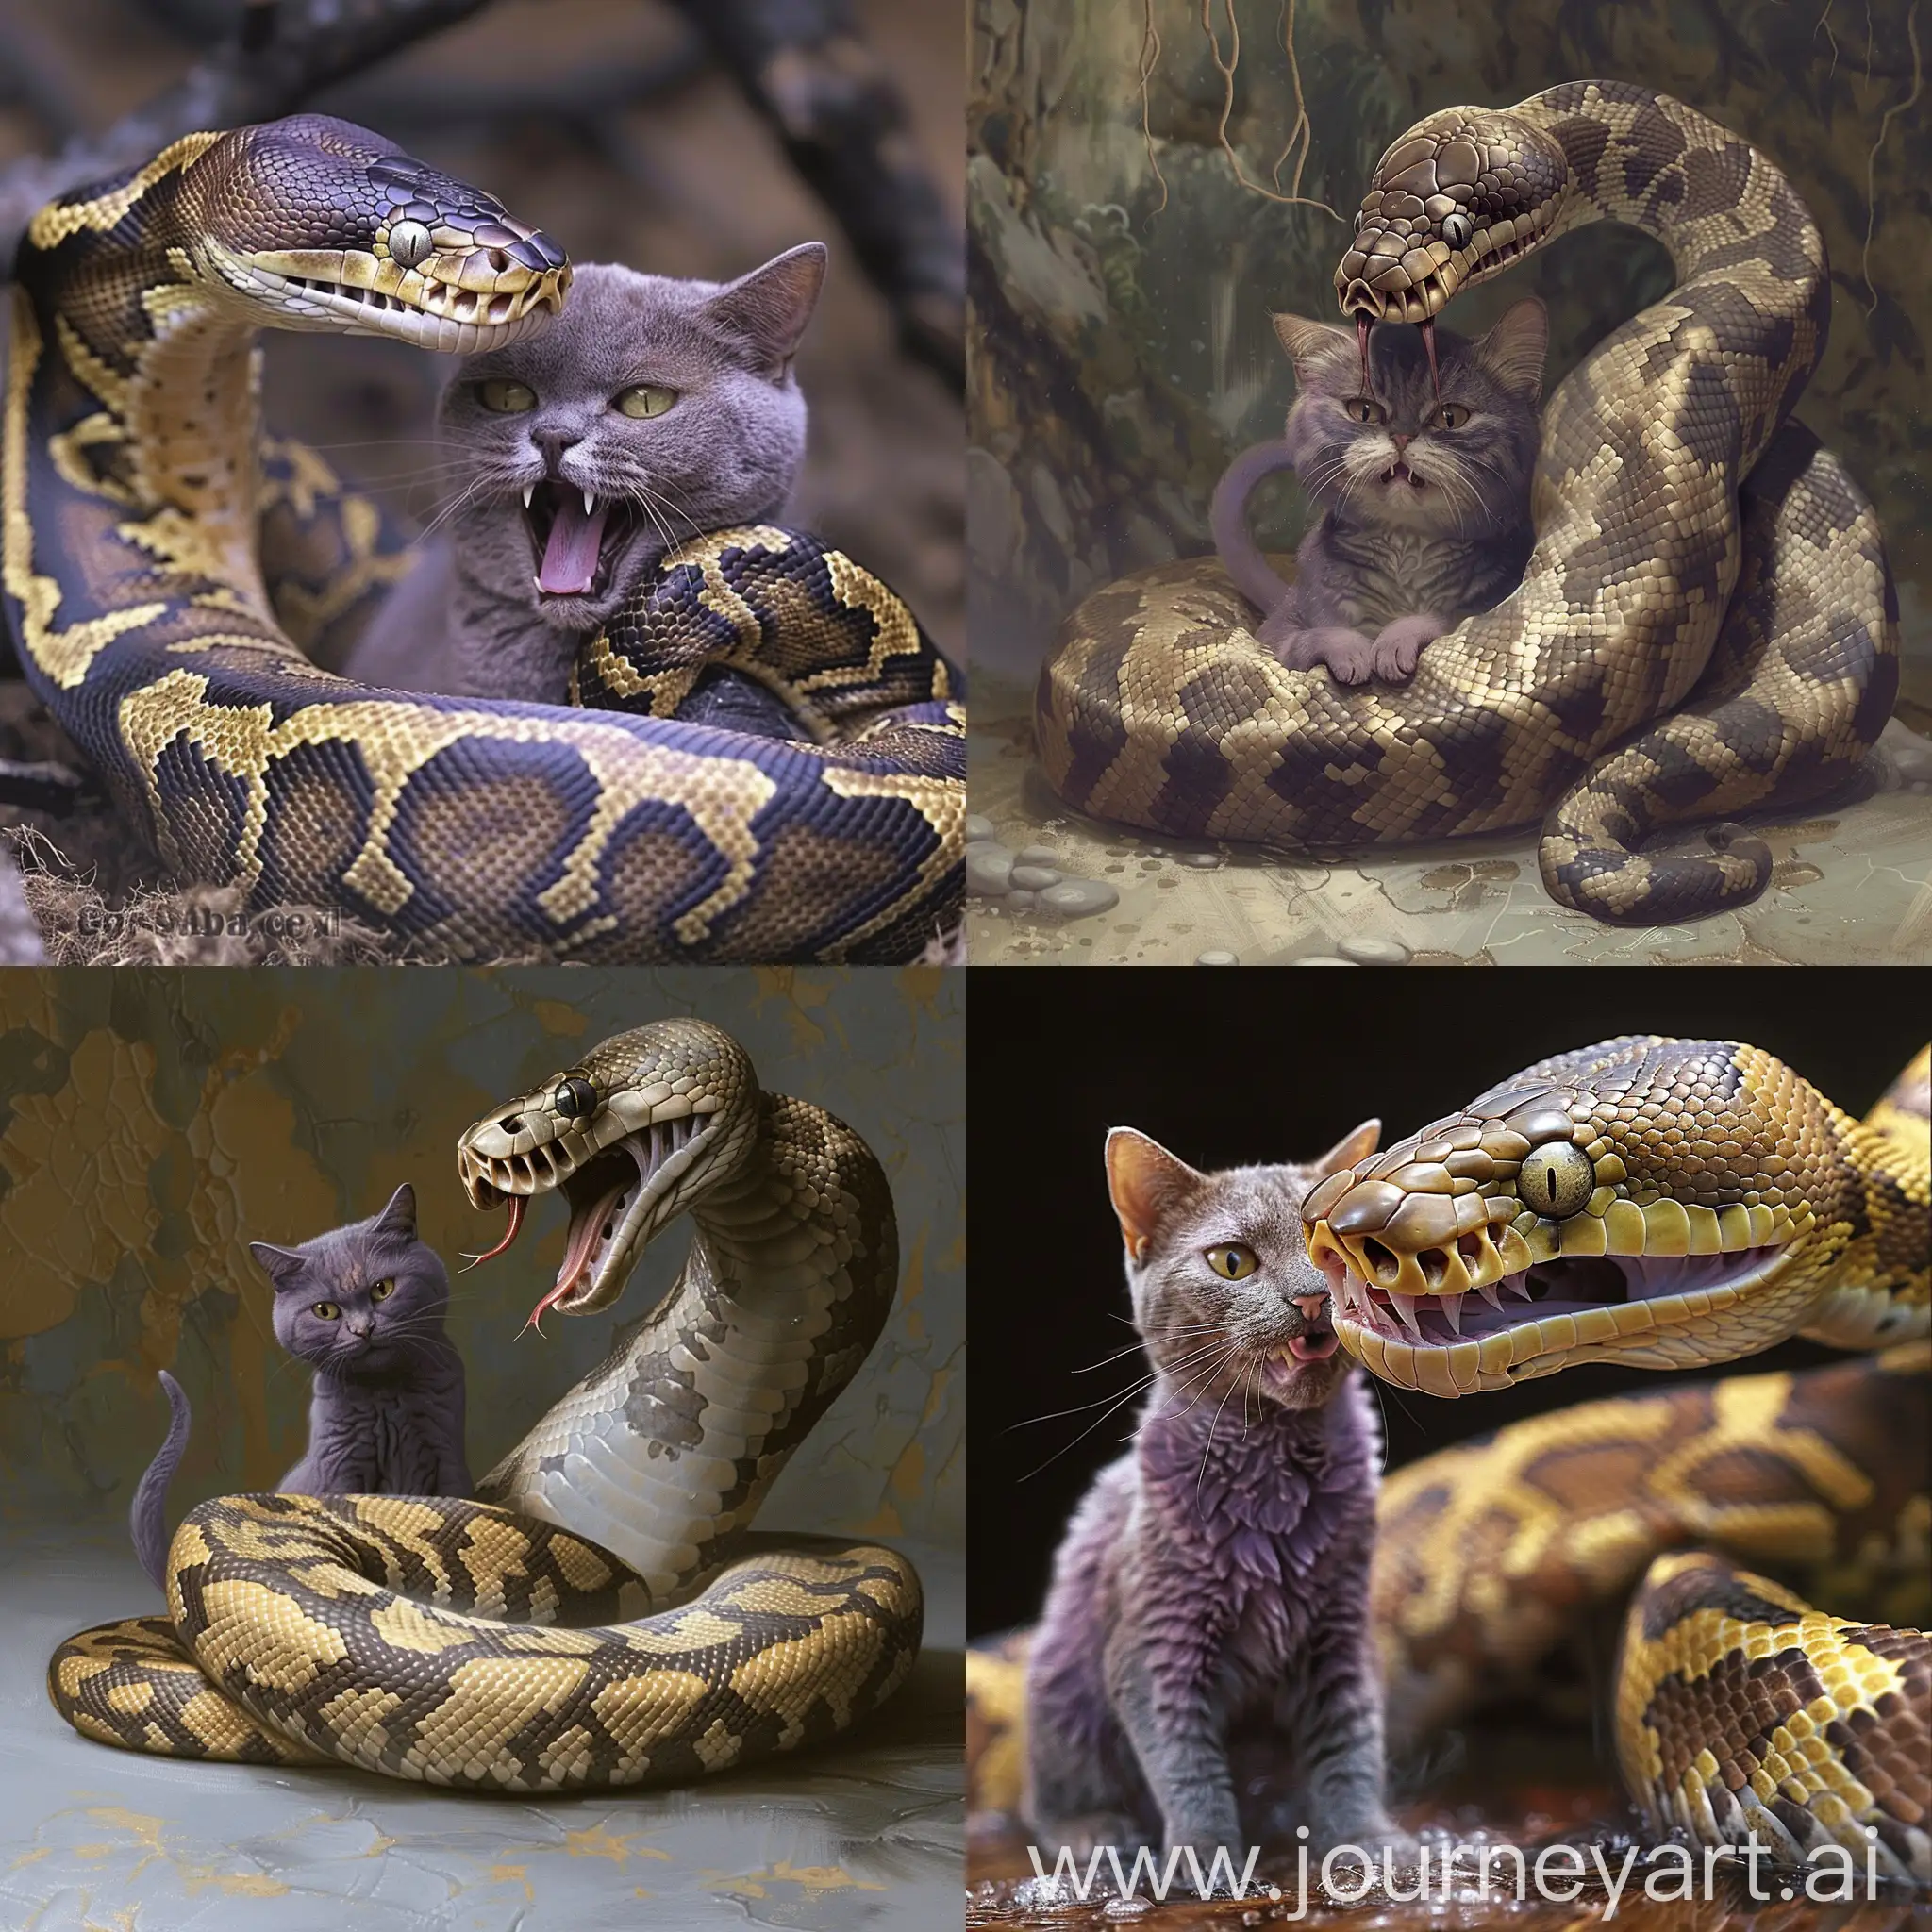 a snake python with an aggressive expression, squeezing a cat that is purple and crying from suffocation